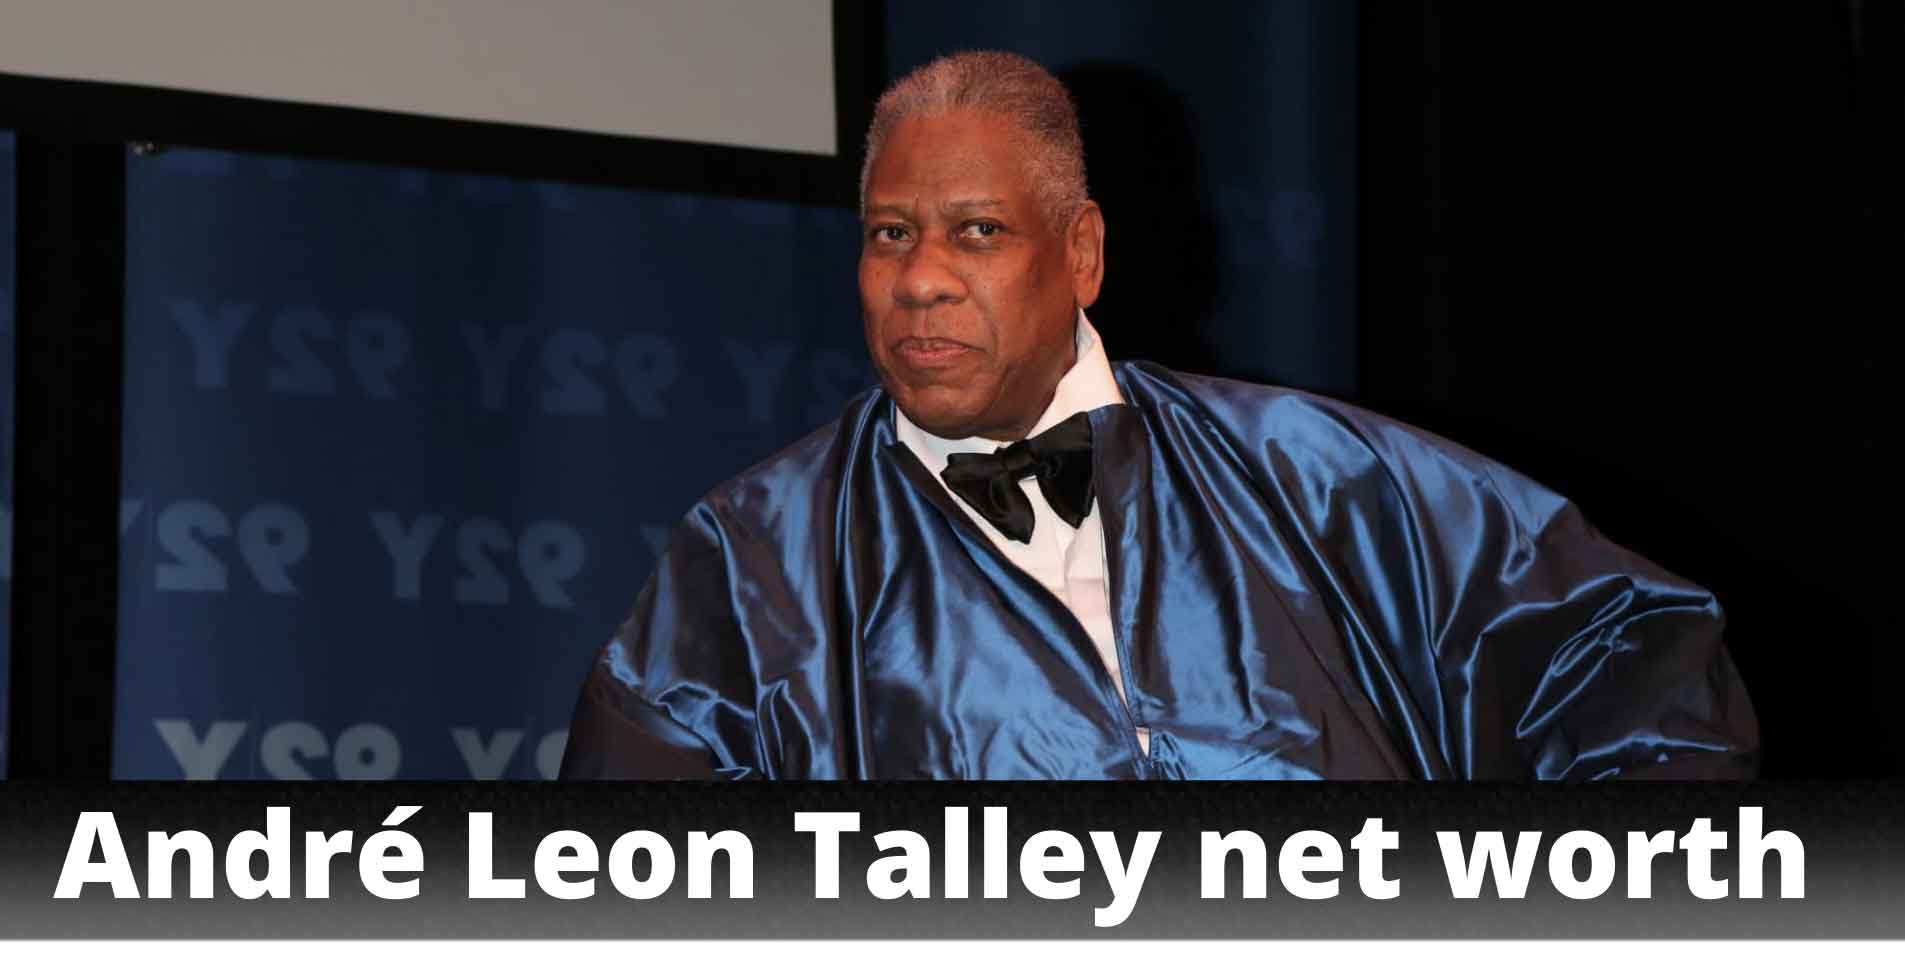 André Leon Talley net worth